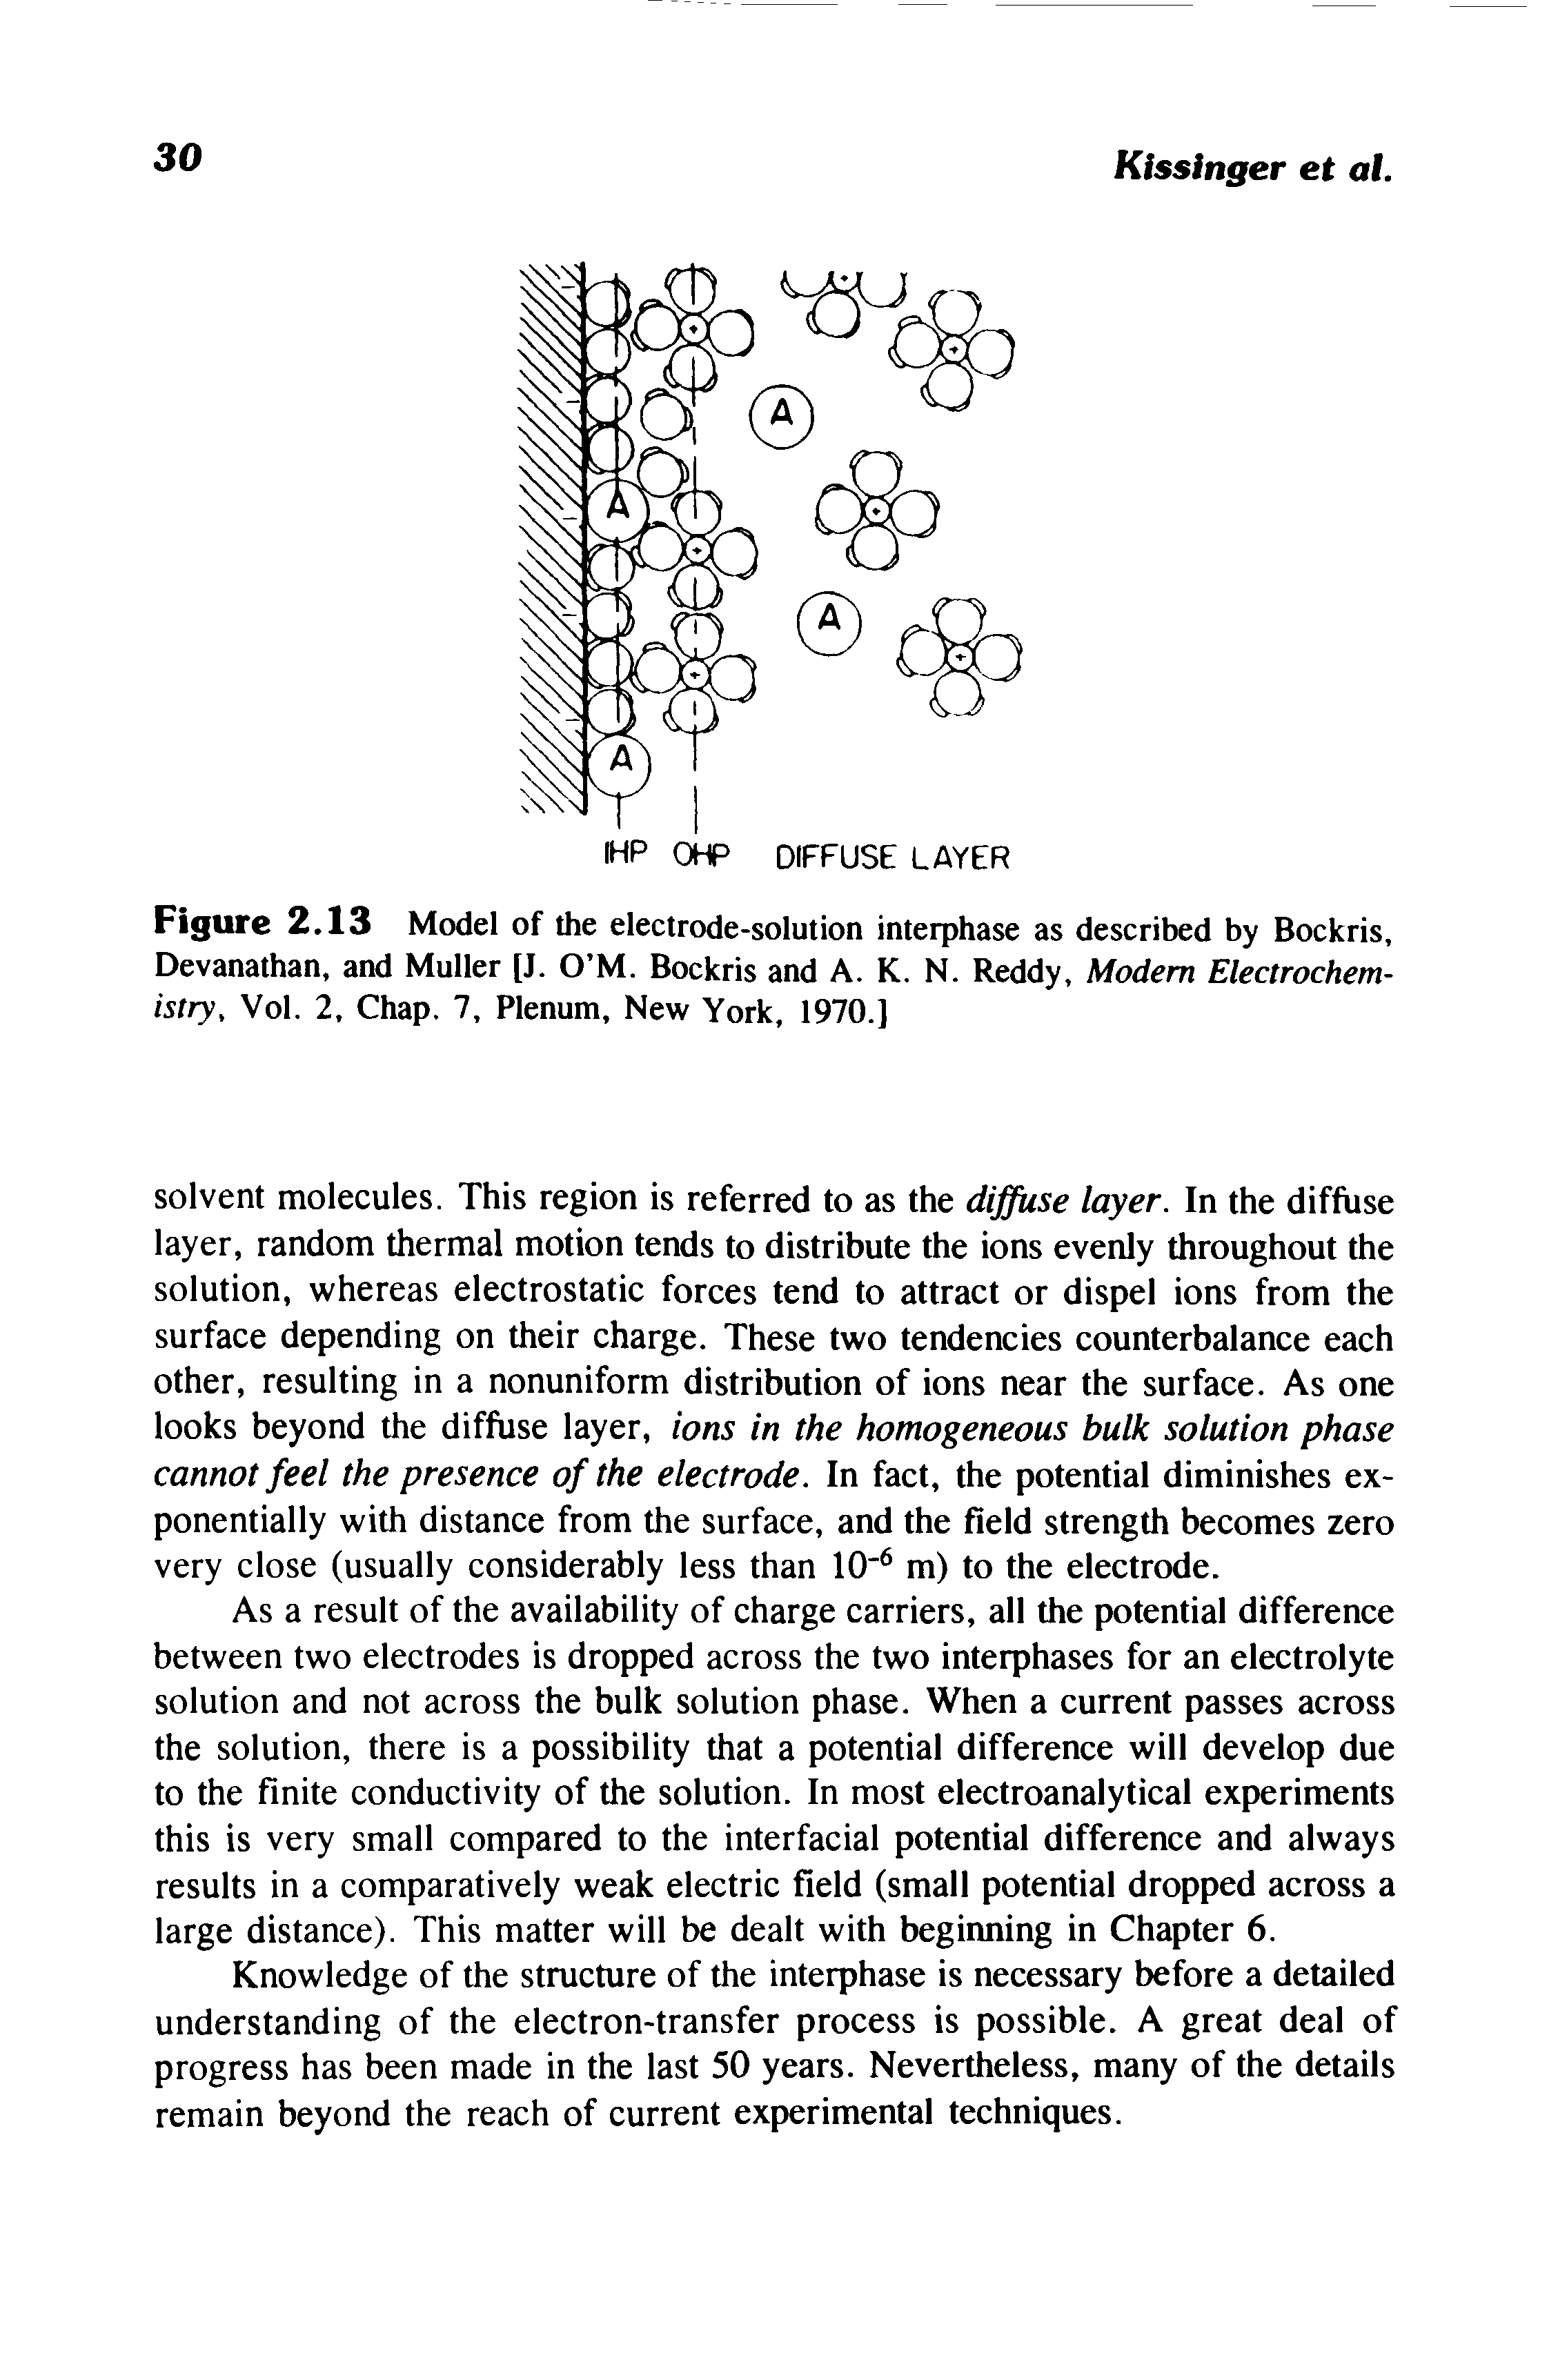 Figure 2.13 Model of the electrode-solution interphase as described by Bockris, Devanathan, and Muller [J. O M. Bockris and A. K. N. Reddy, Modem Electrochemistry, Vol. 2, Chap. 7, Plenum, New York, 1970.]...